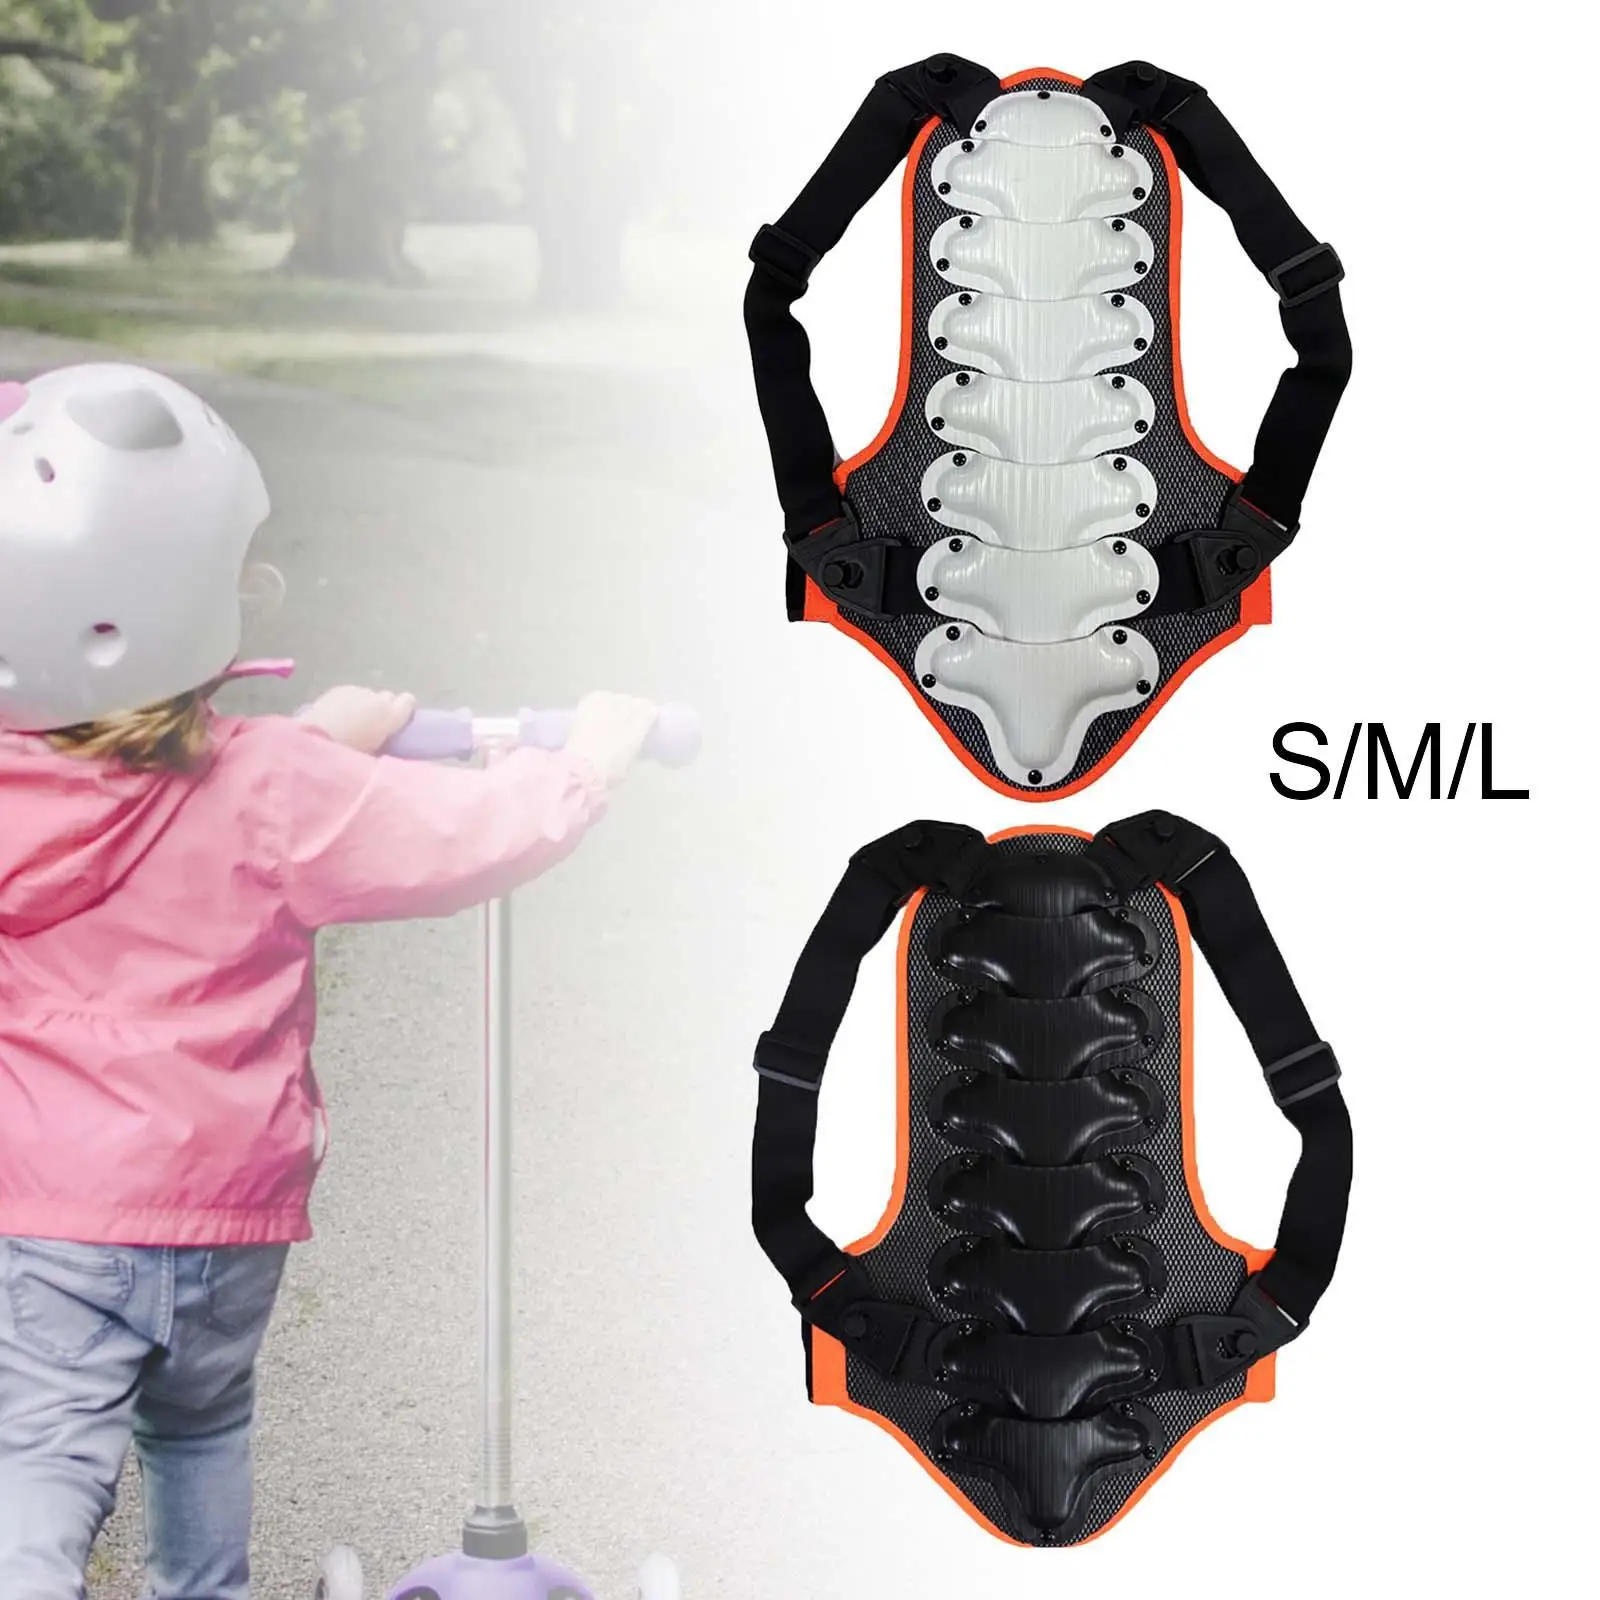 Children Back protector Protection Guard Thickened Cushion Pad for Cycling Snowboarding Riding Sports Motocross